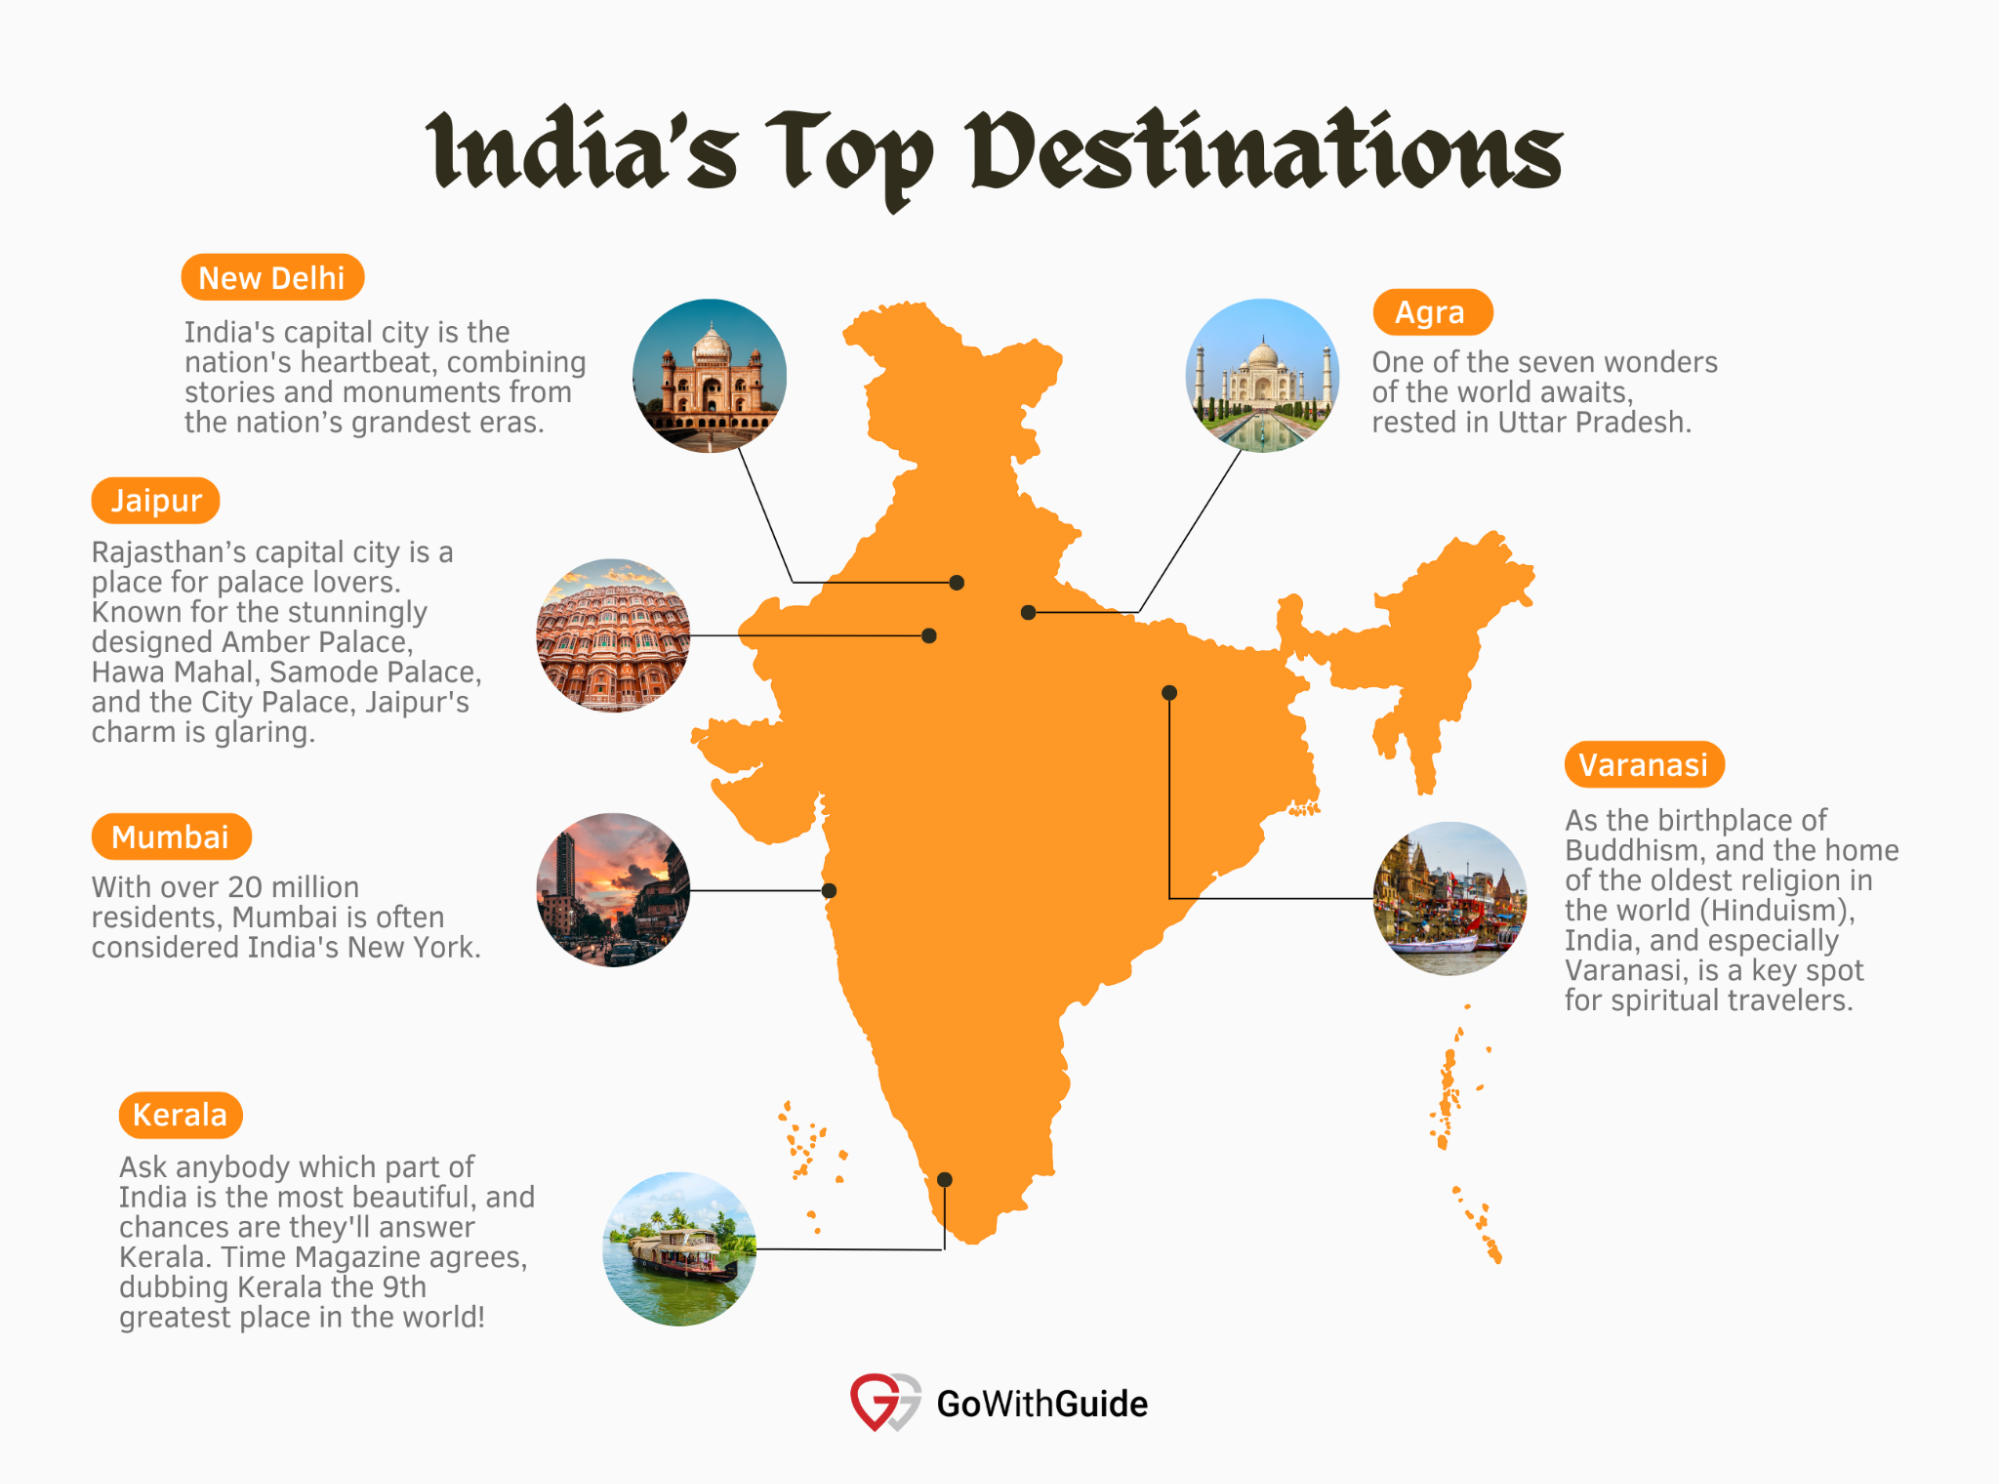 Optimal times to visit different places in India